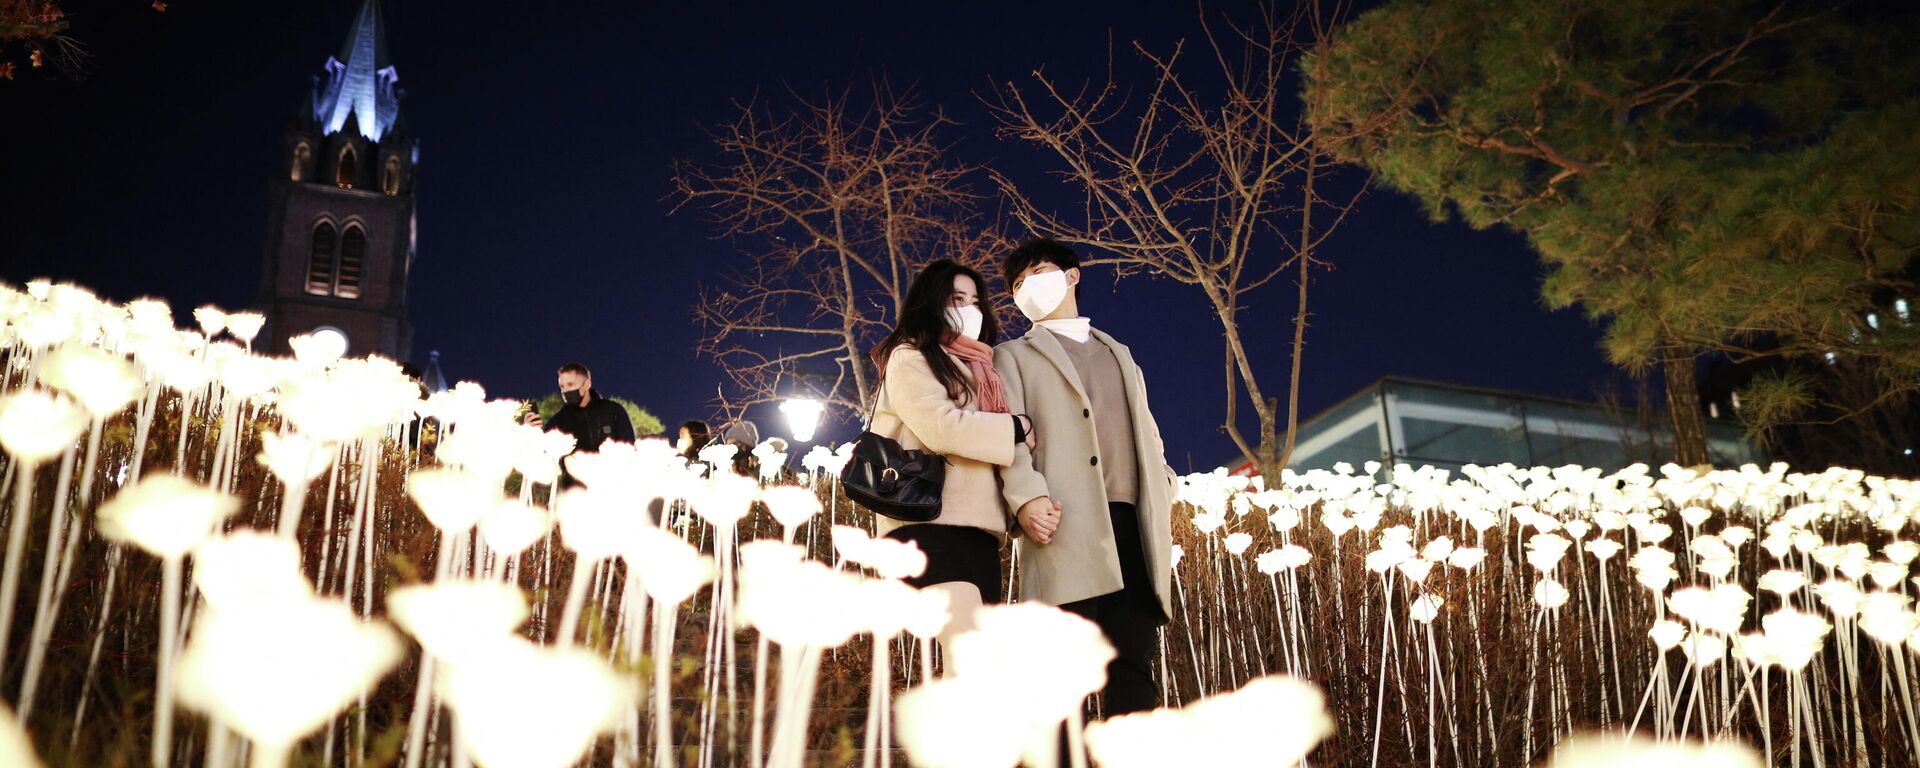 A couple wearing masks to prevent contracting the coronavirus disease (COVID-19) enjoys a Christmas illumination at Myeongdong Cathedral in Seoul, South Korea, December 23, 2021 - Sputnik International, 1920, 27.12.2021